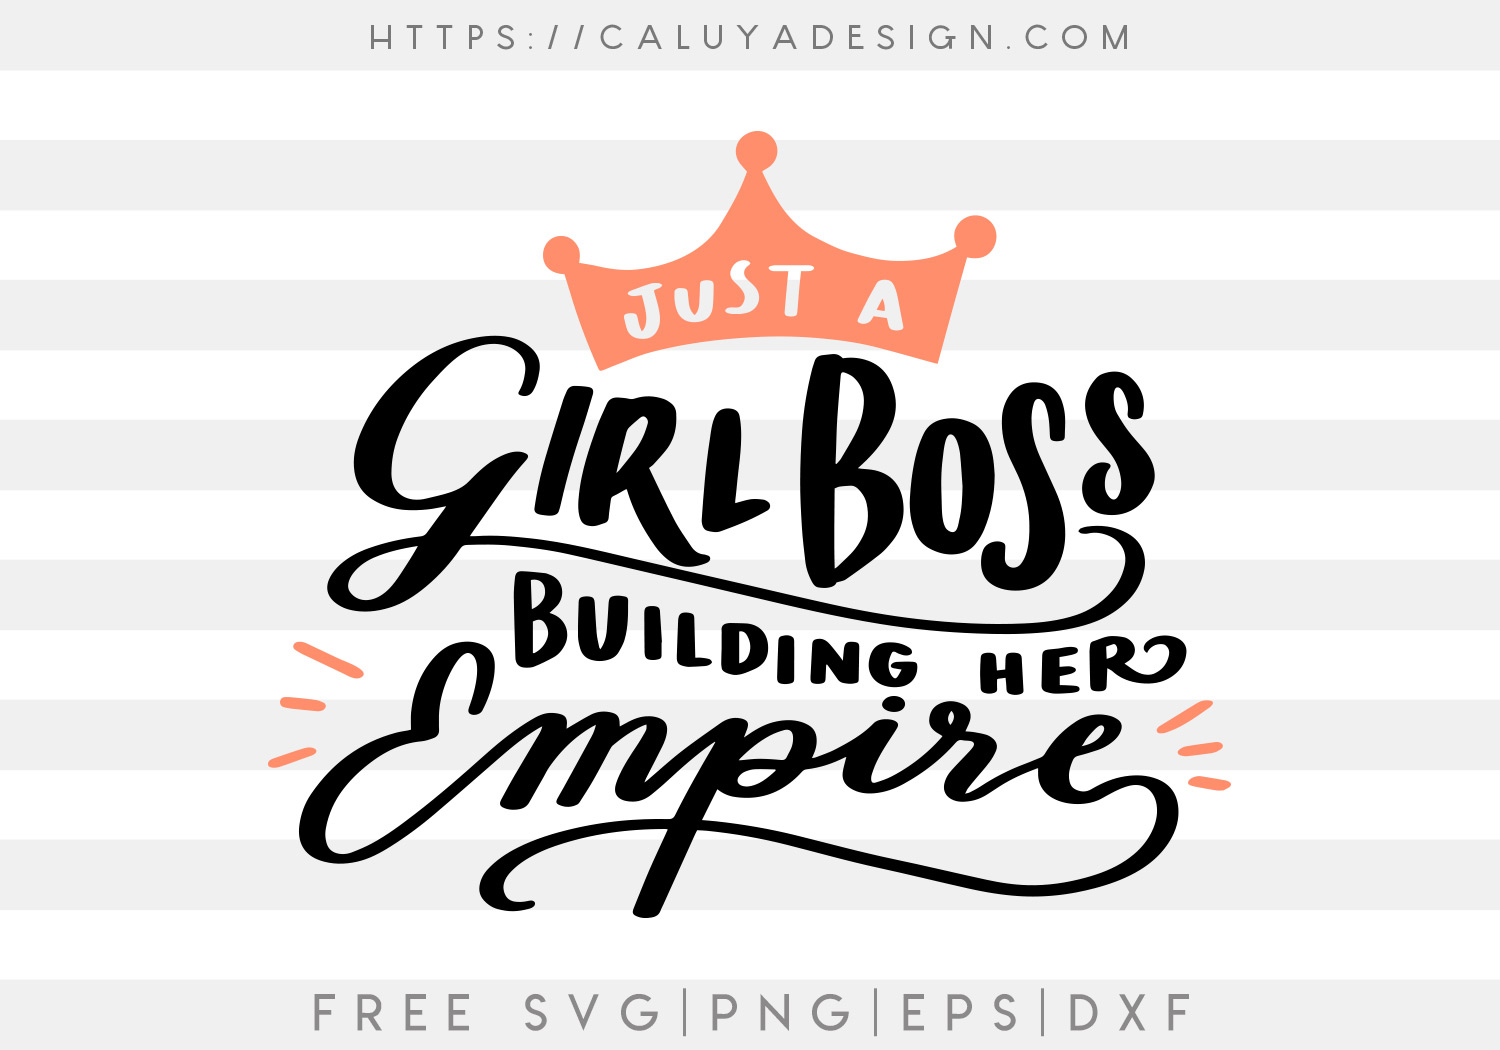 Just A Girlboss SVG, PNG, EPS & DXF